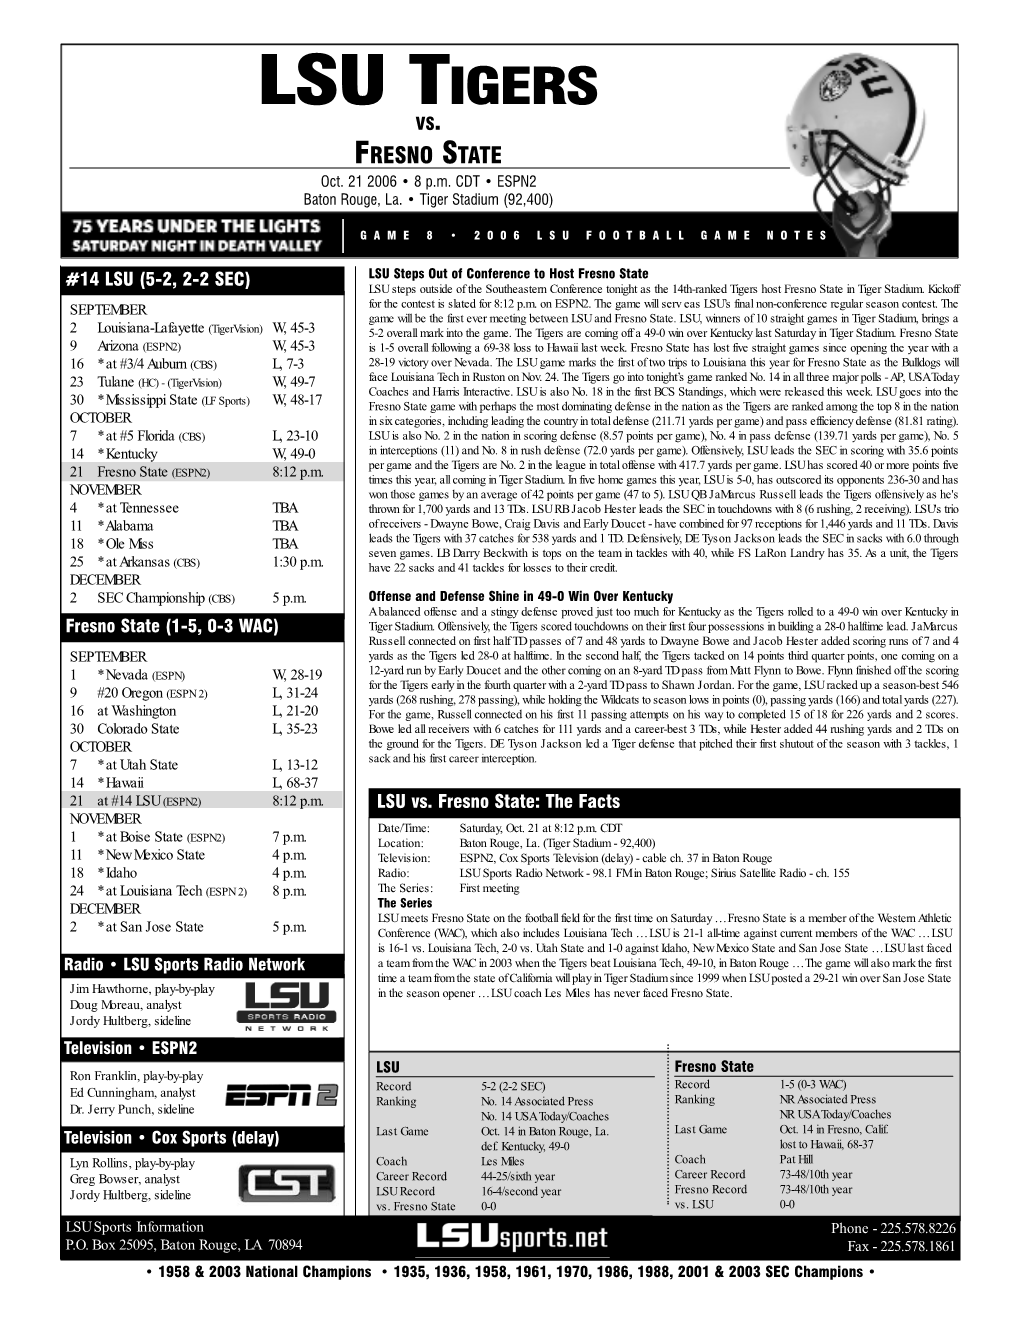 Game 8 Notes